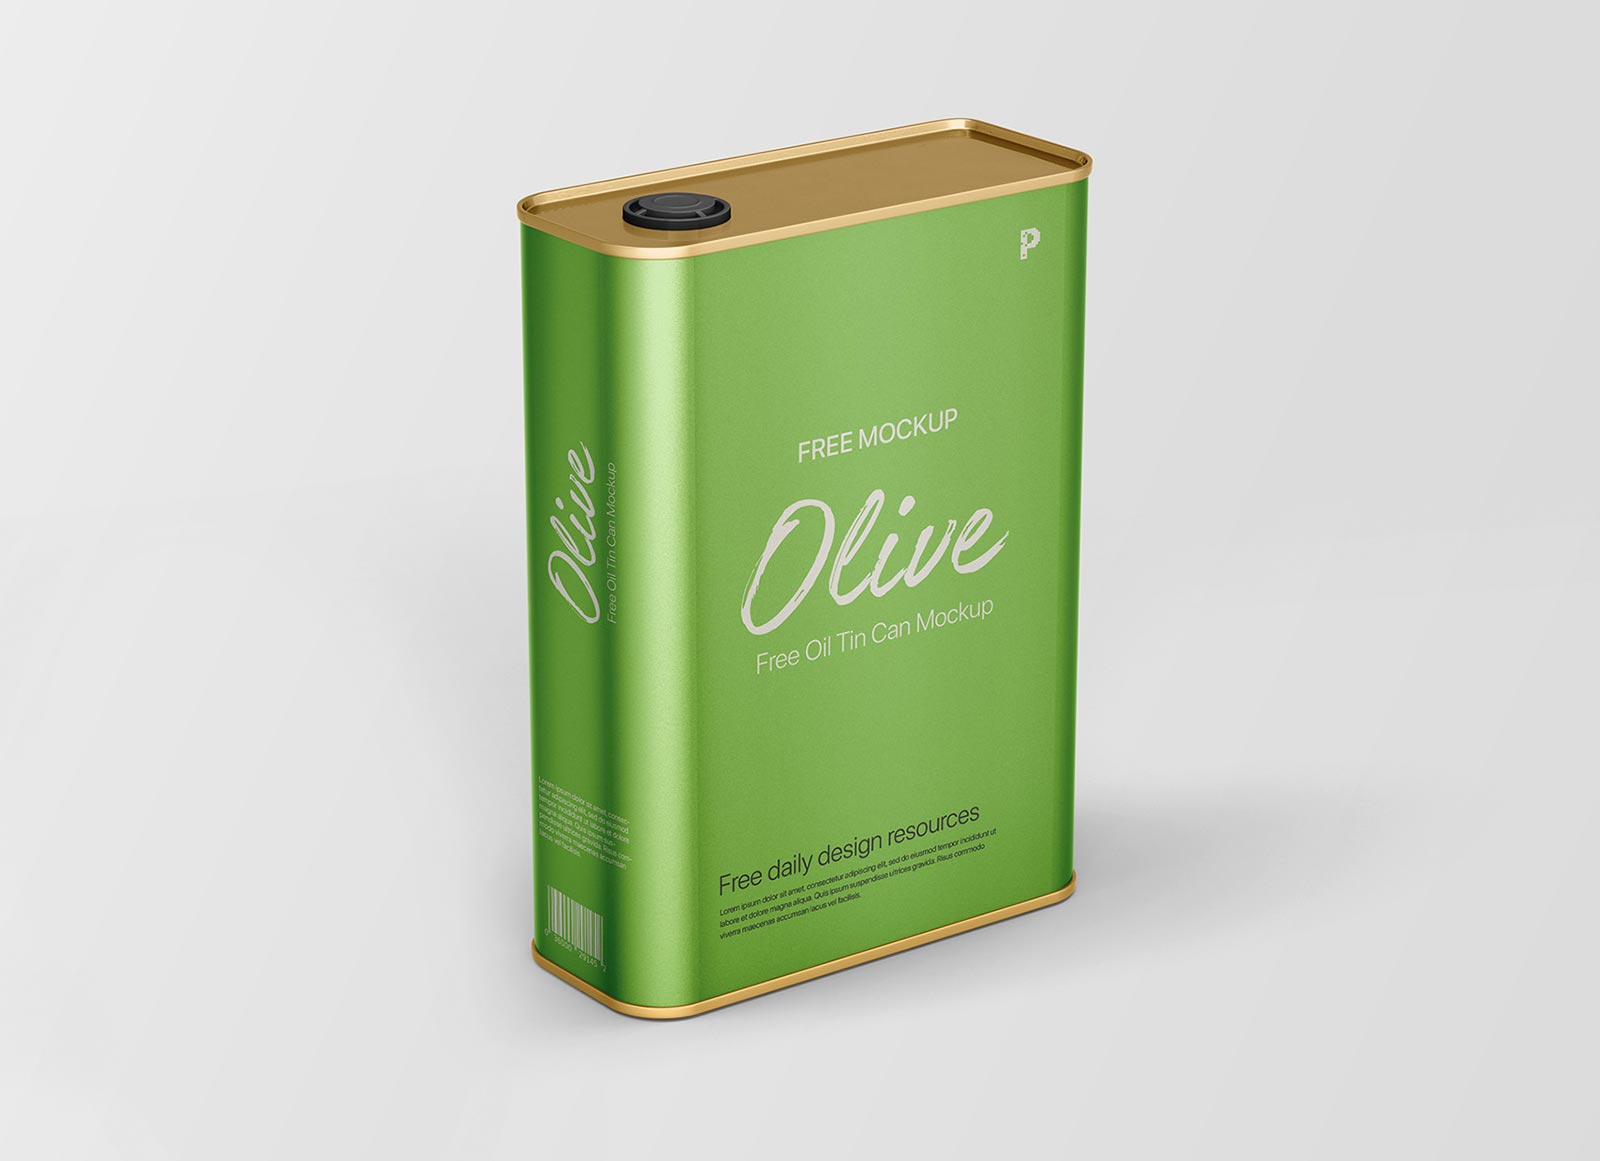 Free-Cooking-Oil-Tin-Can-Mockup-PSD